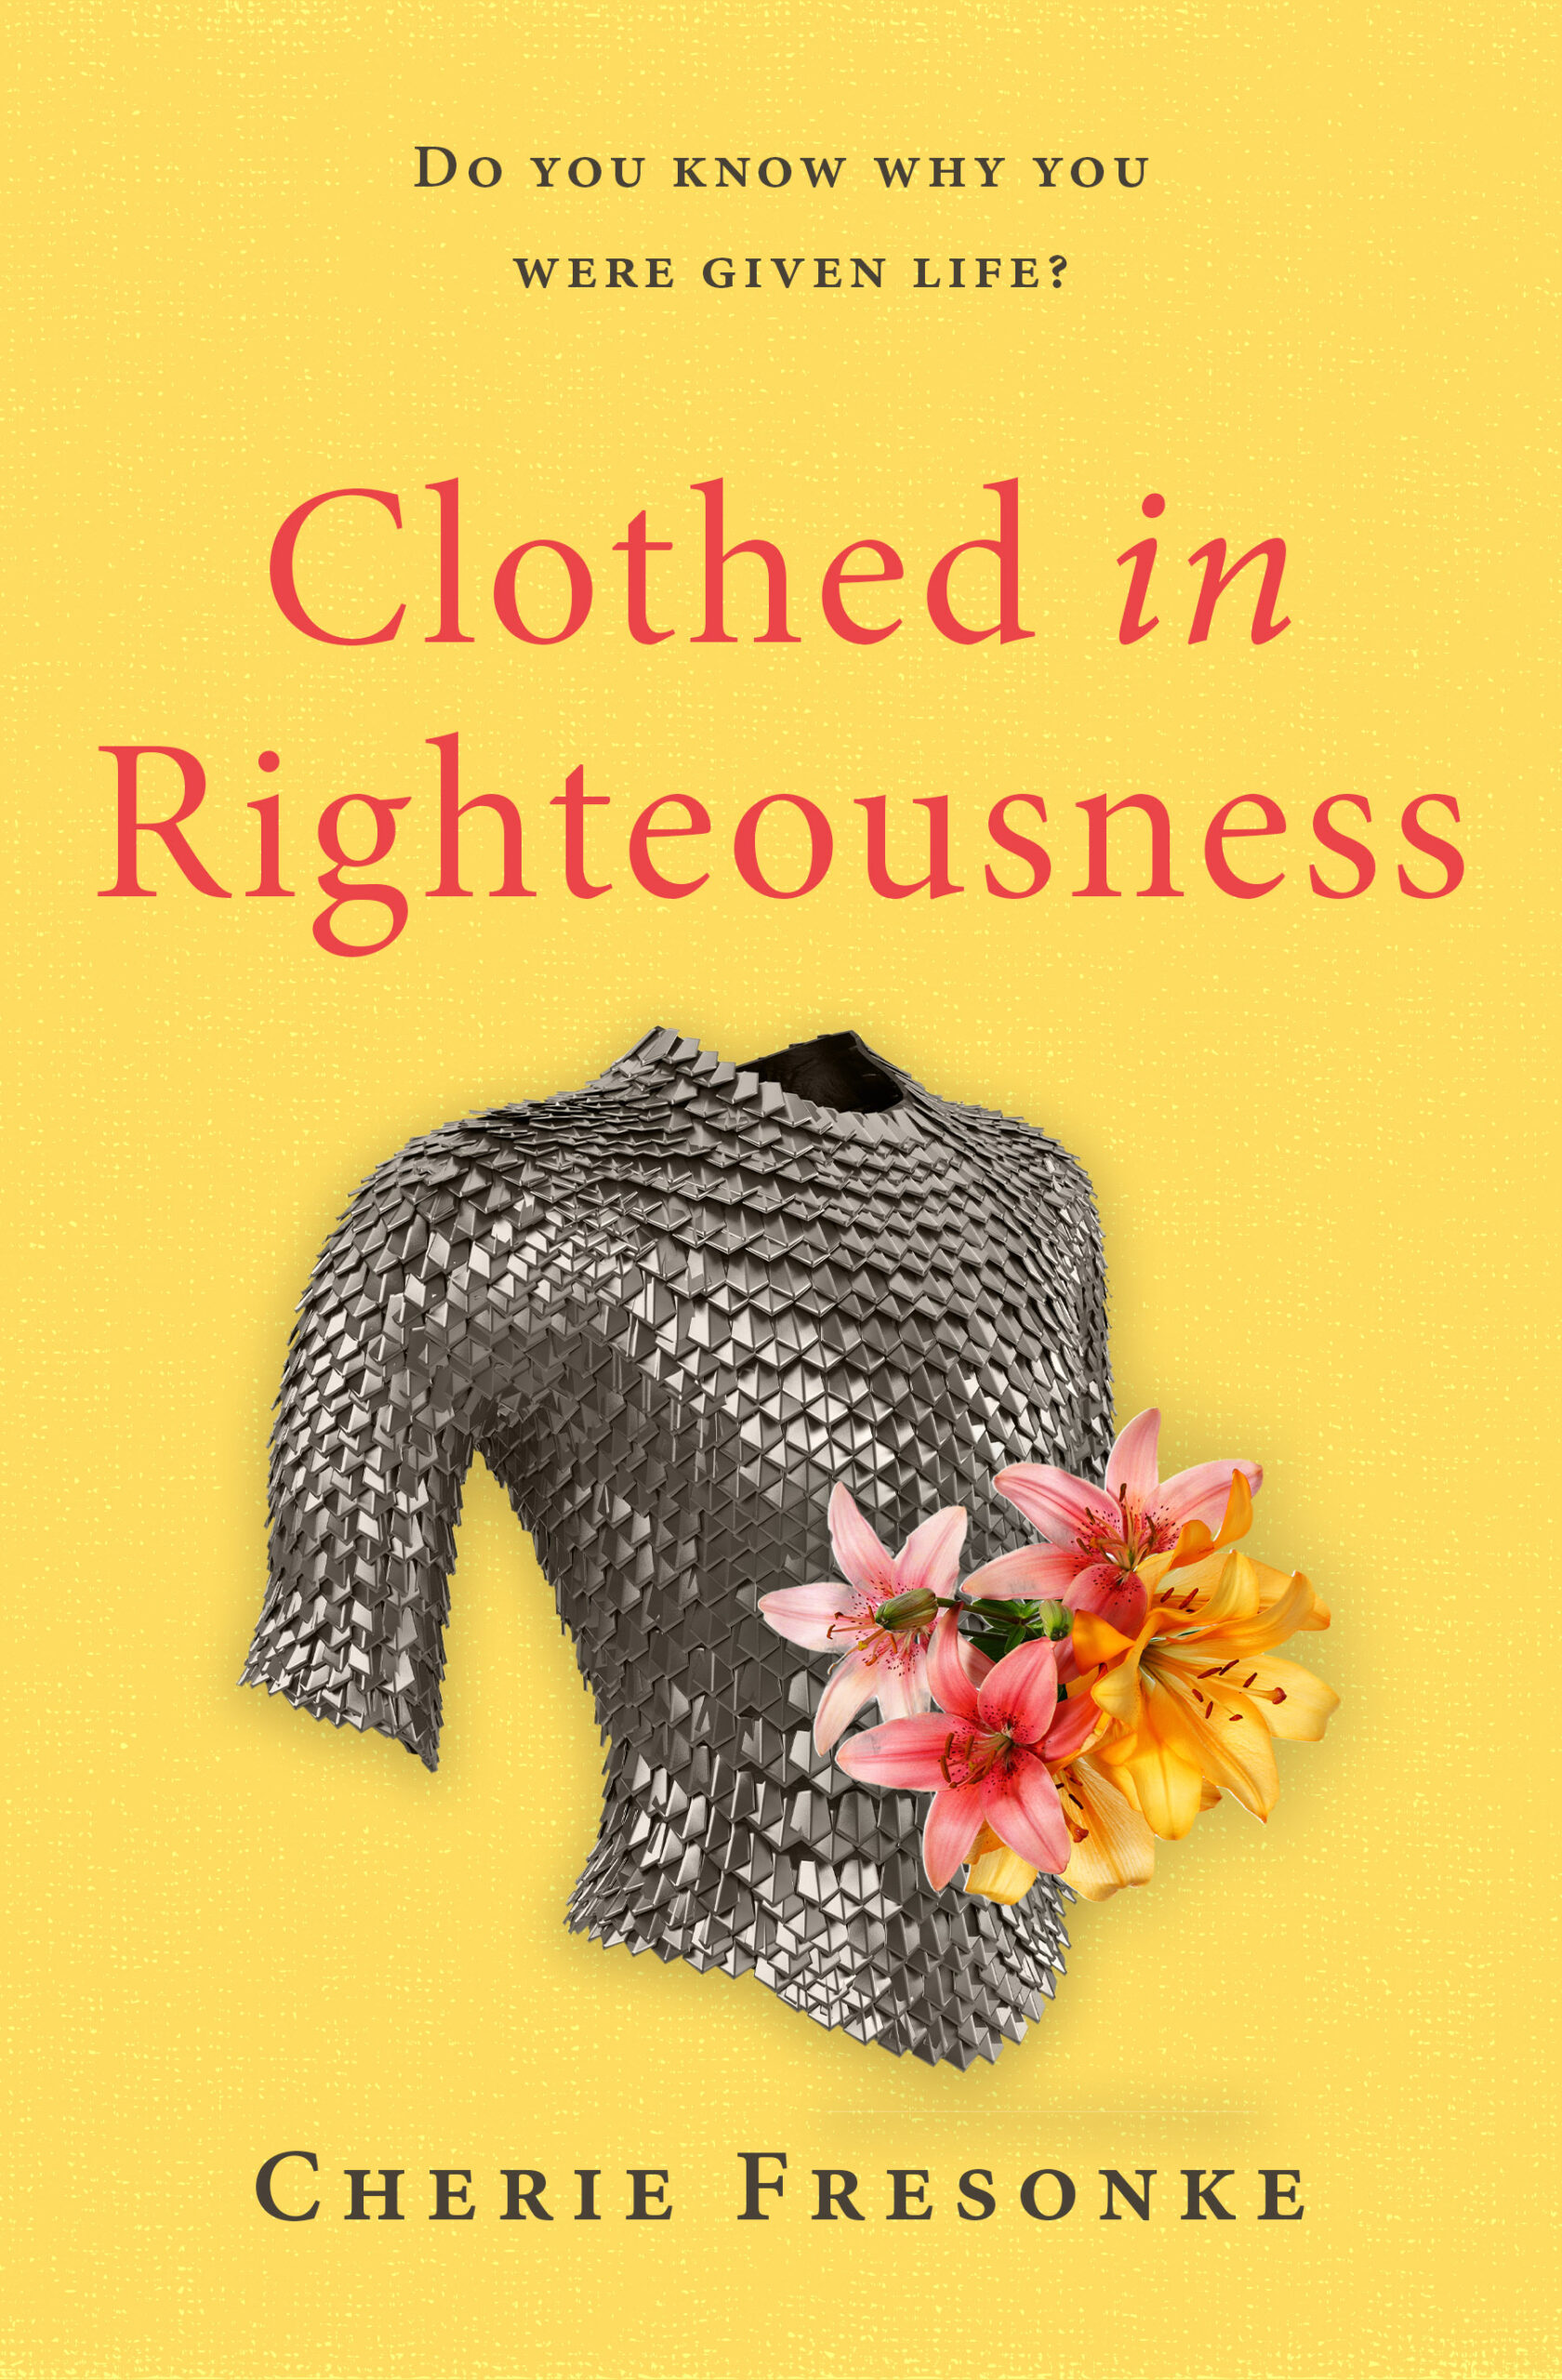 Clothed in Righteousness by Cherie Fresonke